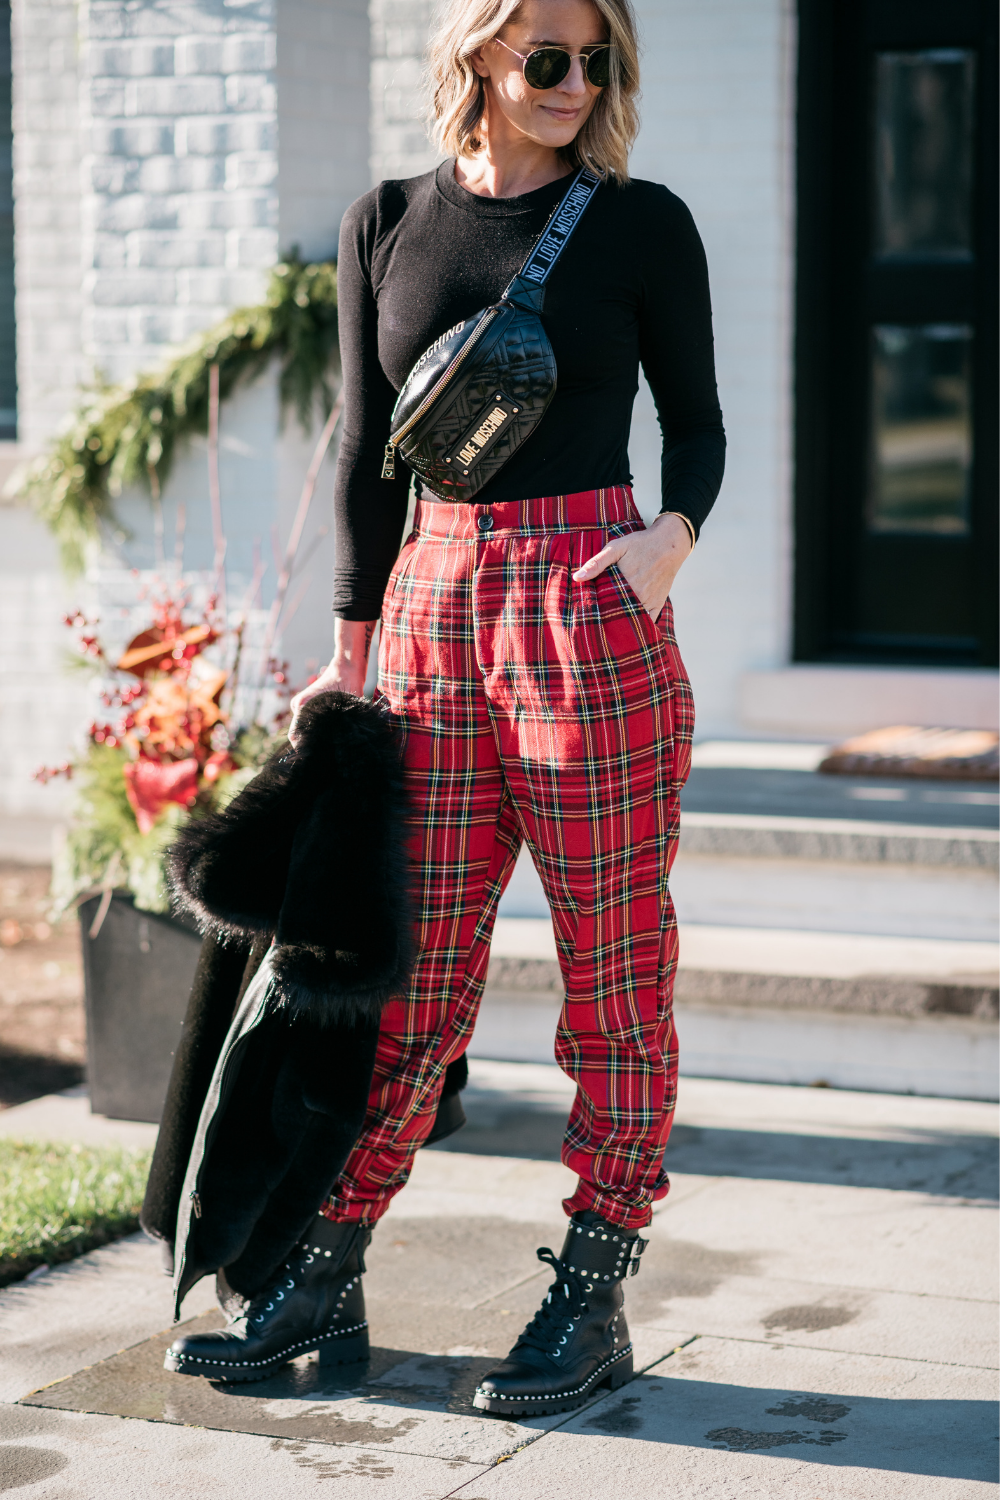 https://mykindofsweet.com/wp-content/uploads/2020/12/red-plaid-pants-6.png